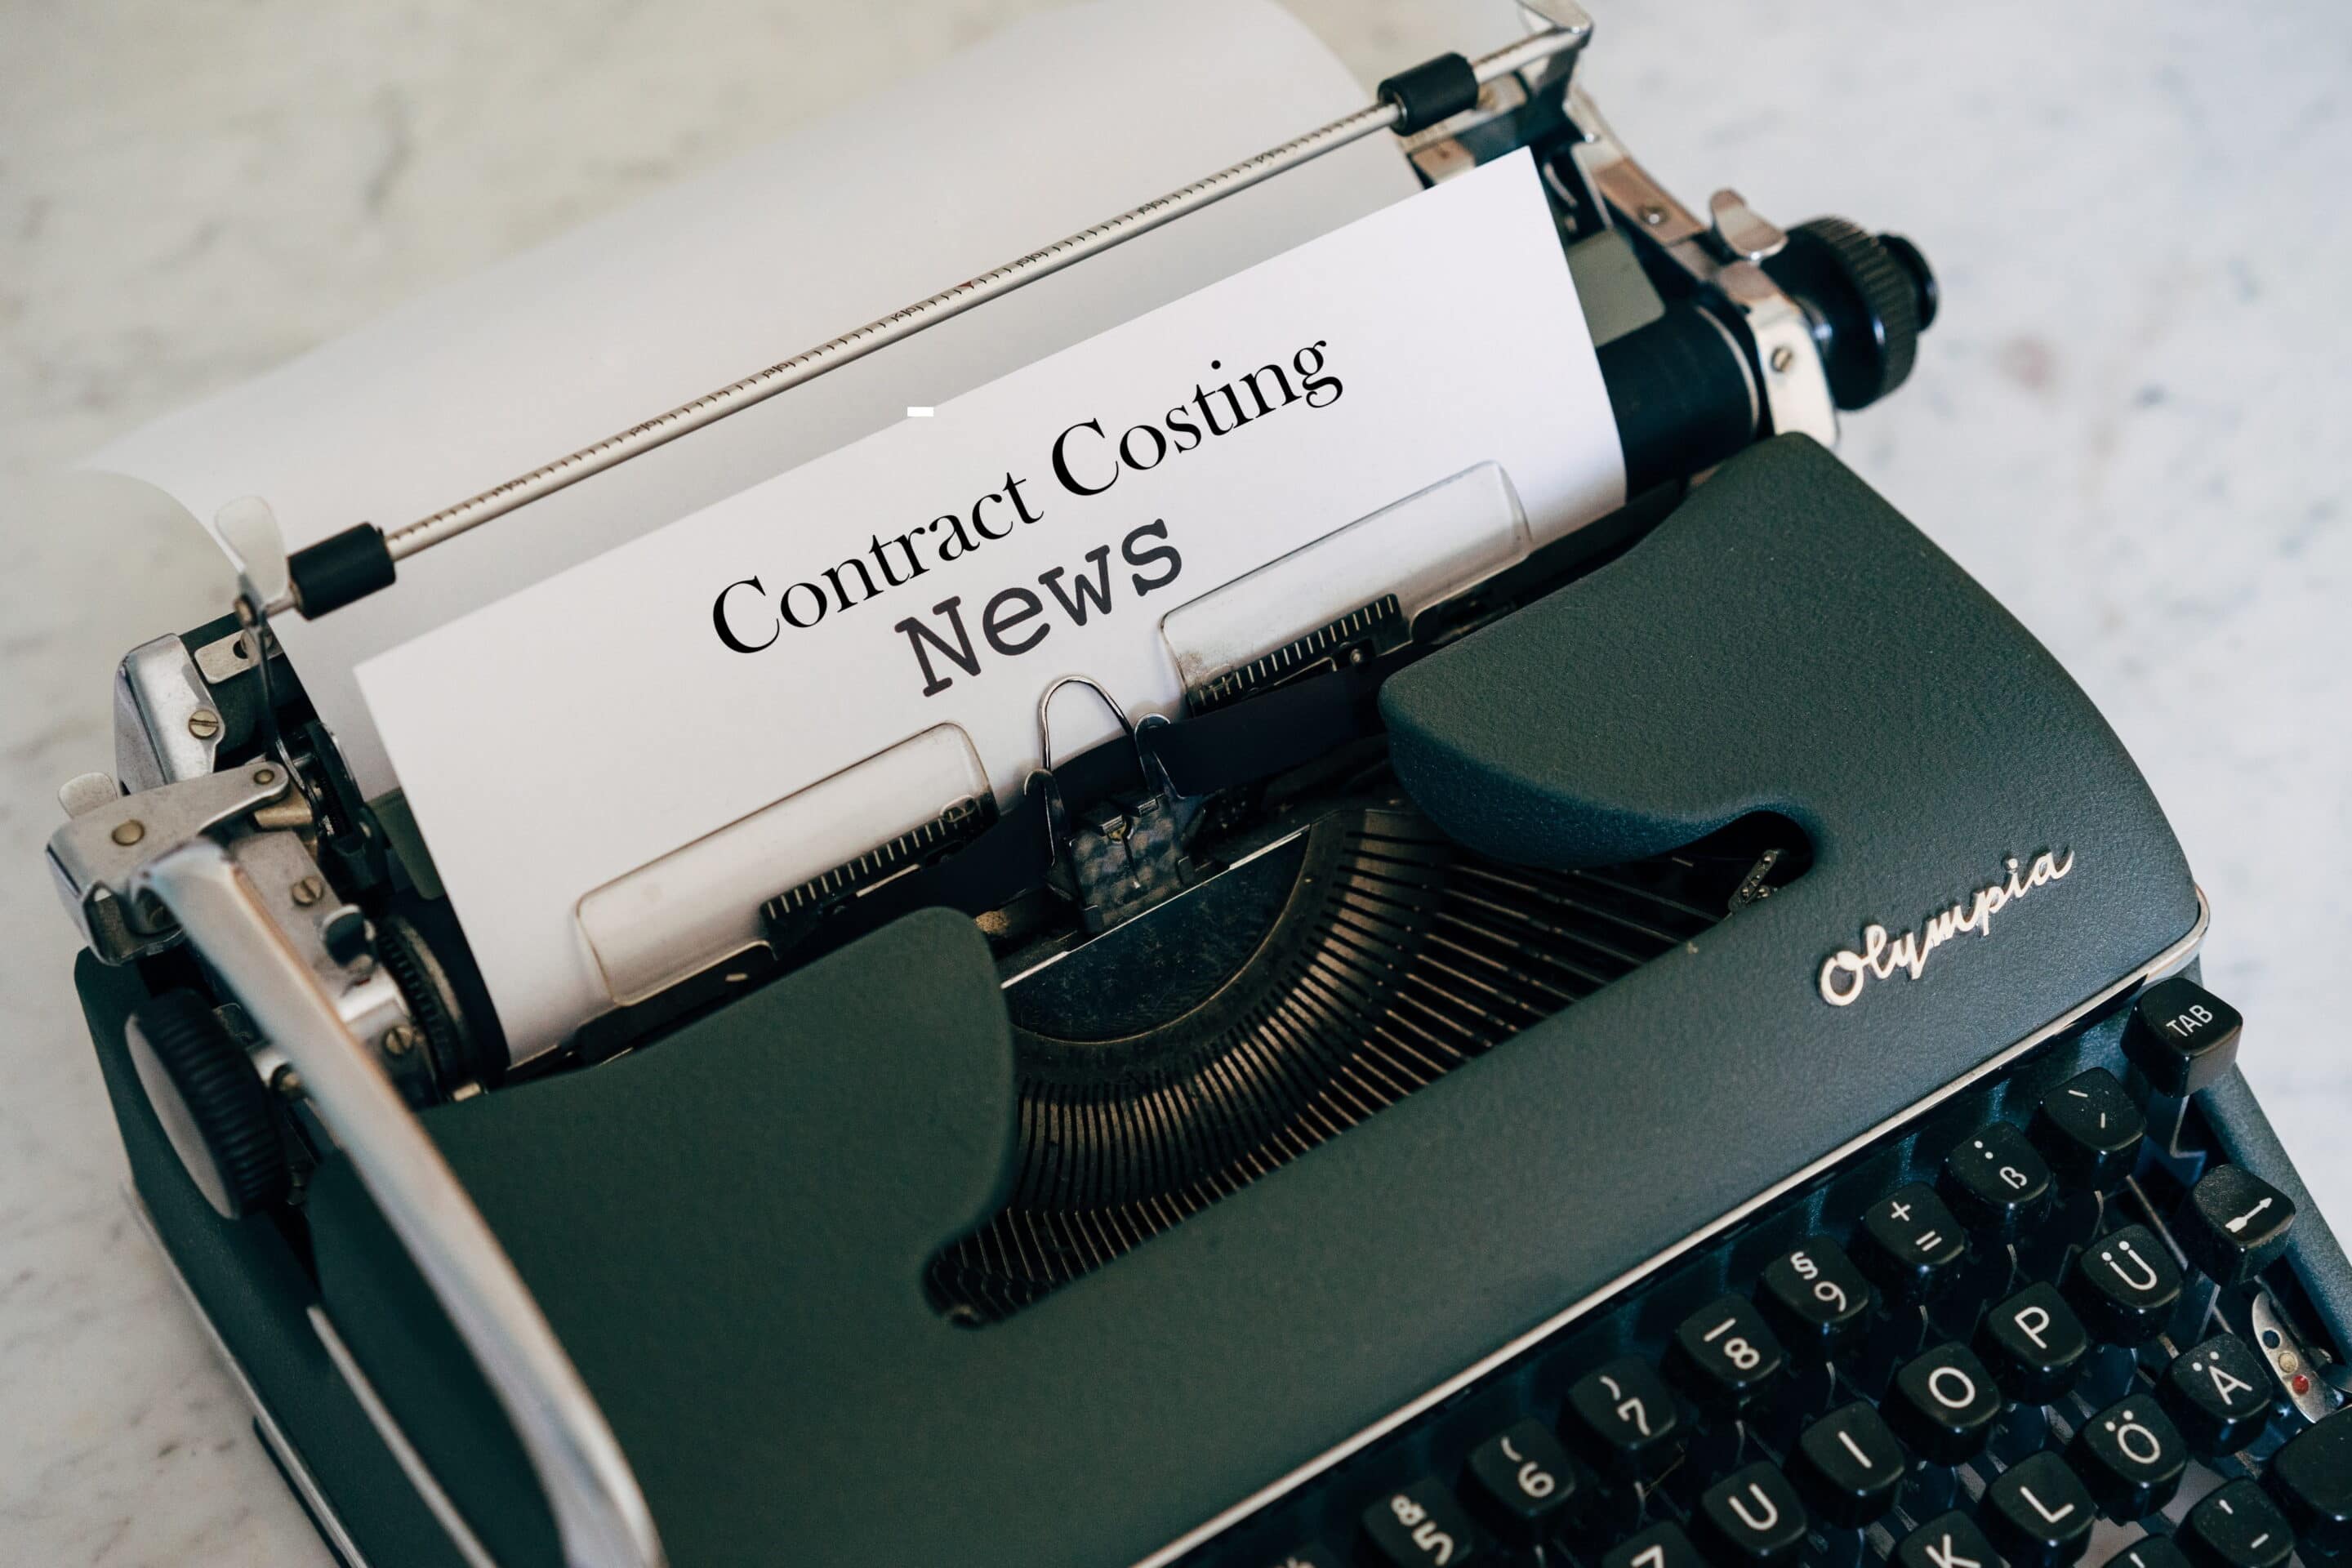 Contract Costing News